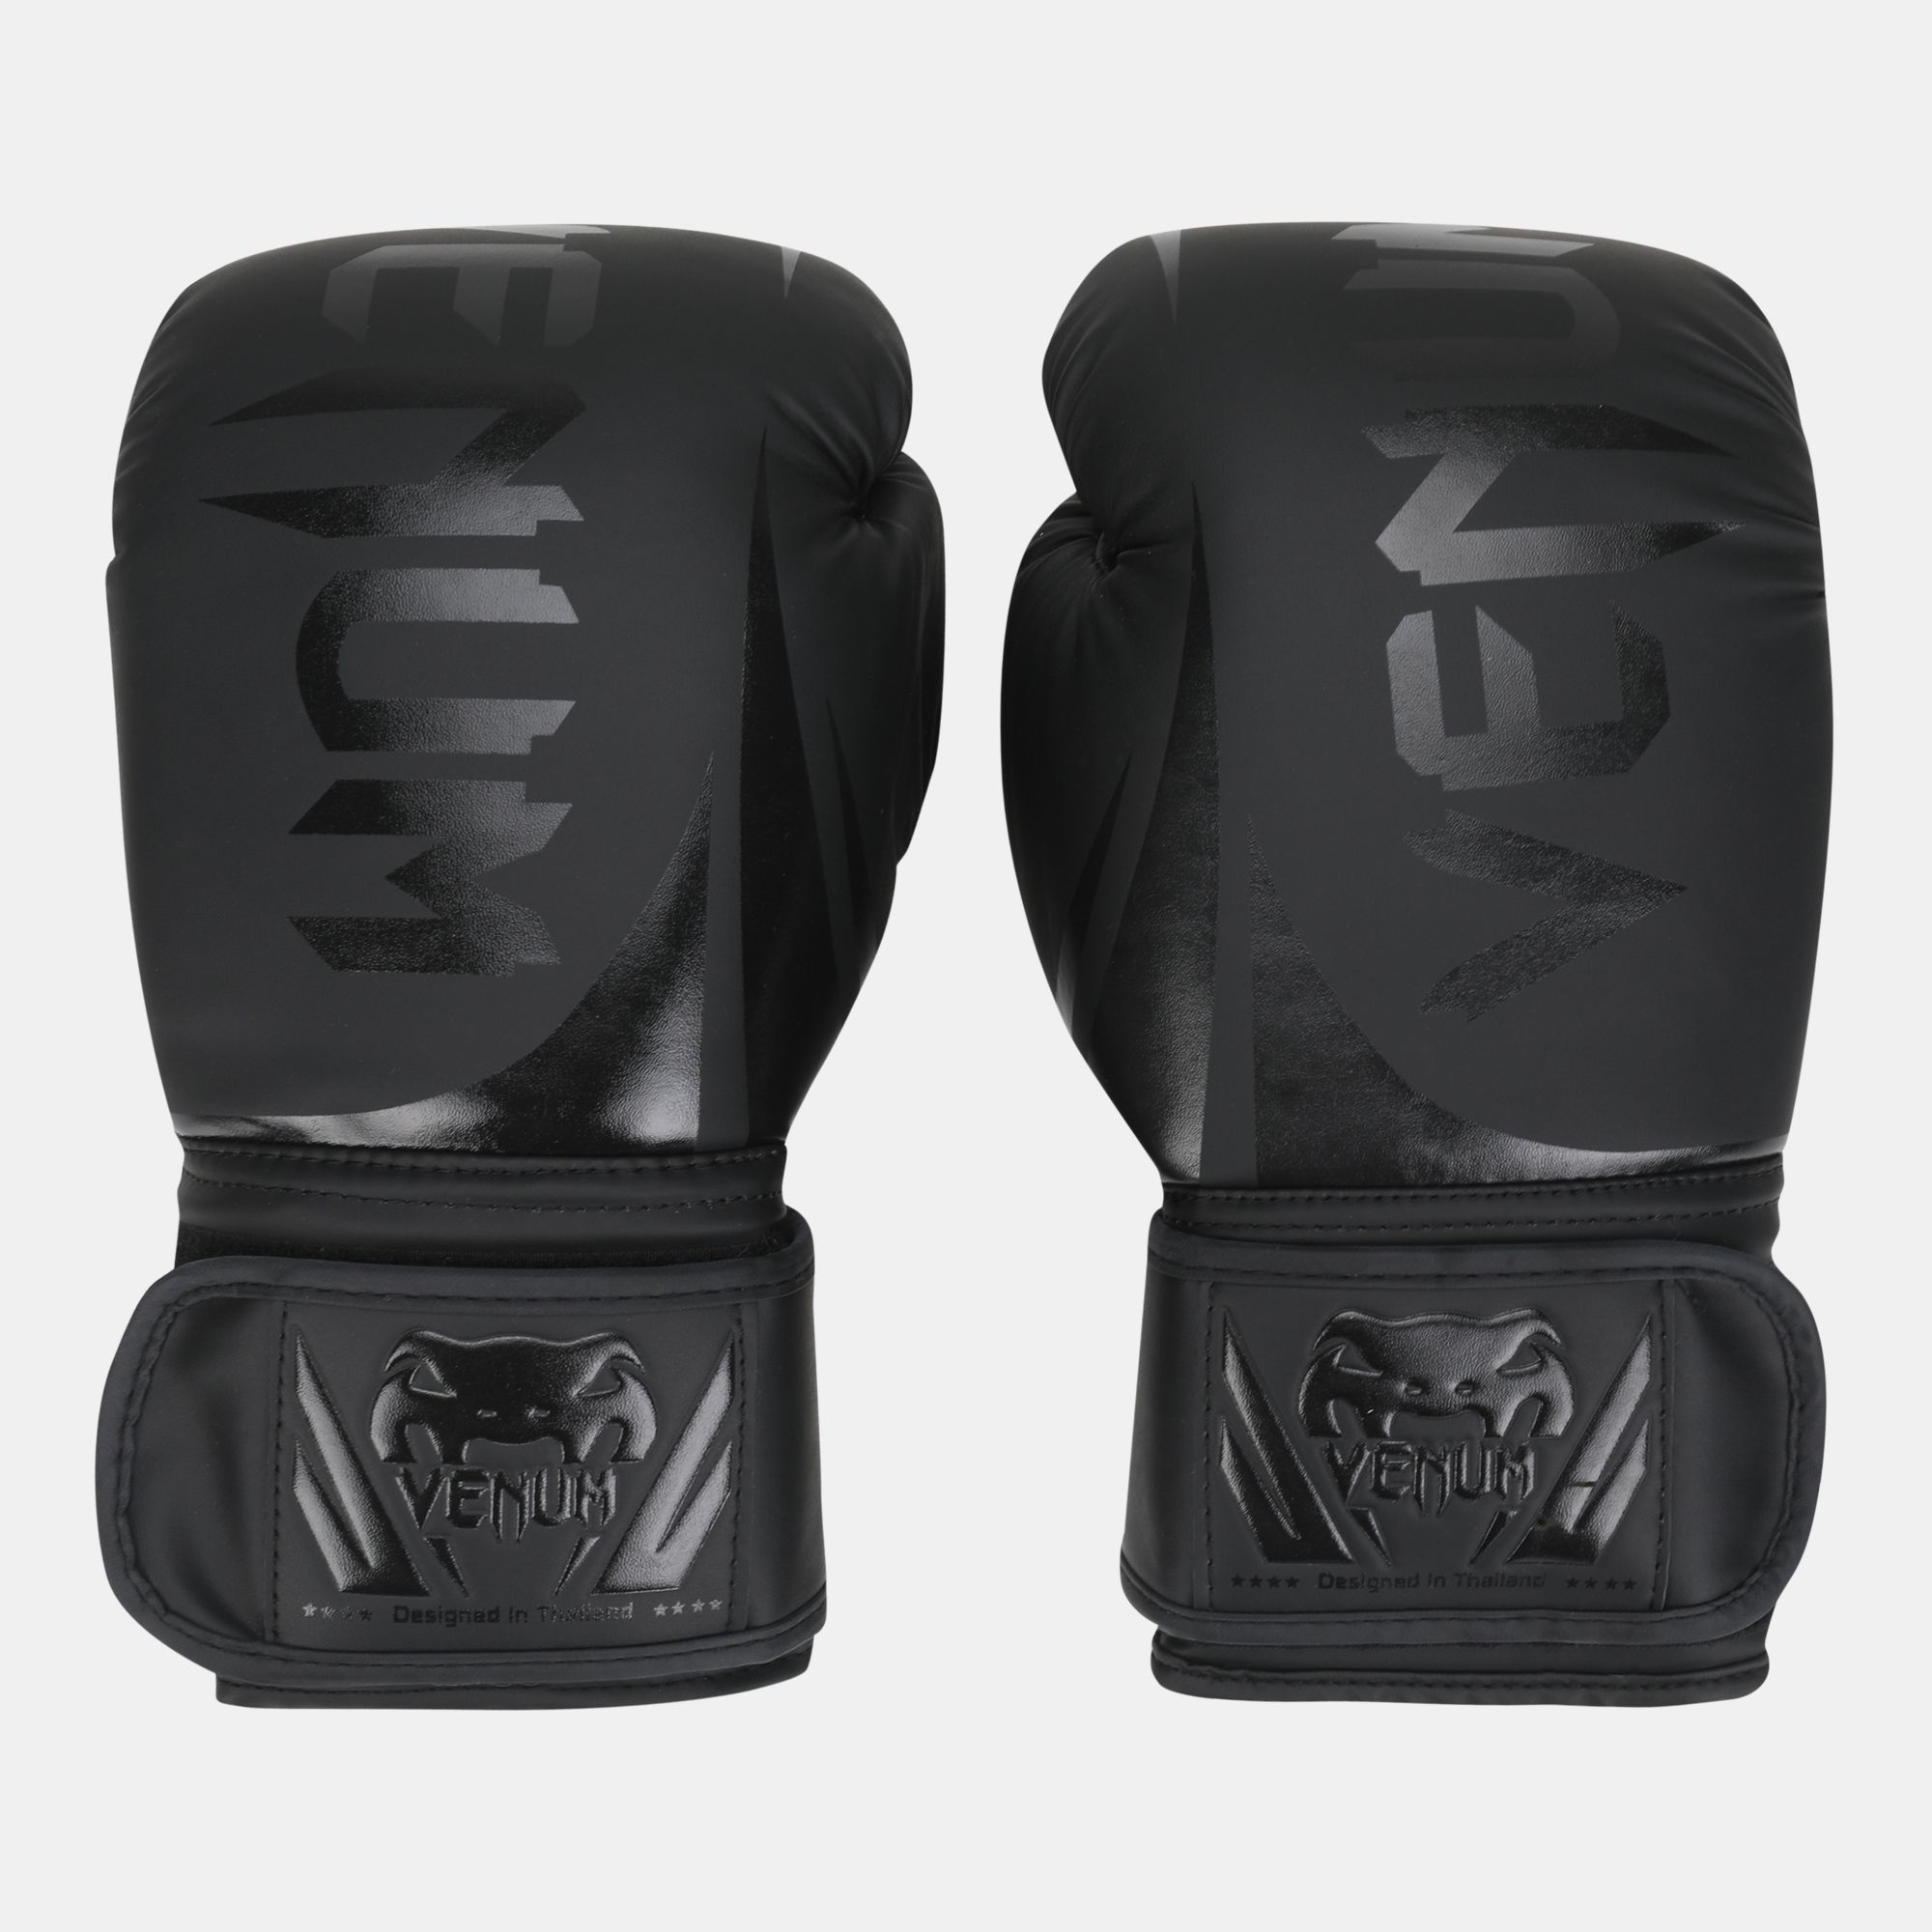 Download Boxing & MMA Equipment Venum Challenger 2.0 Boxing Gloves ...